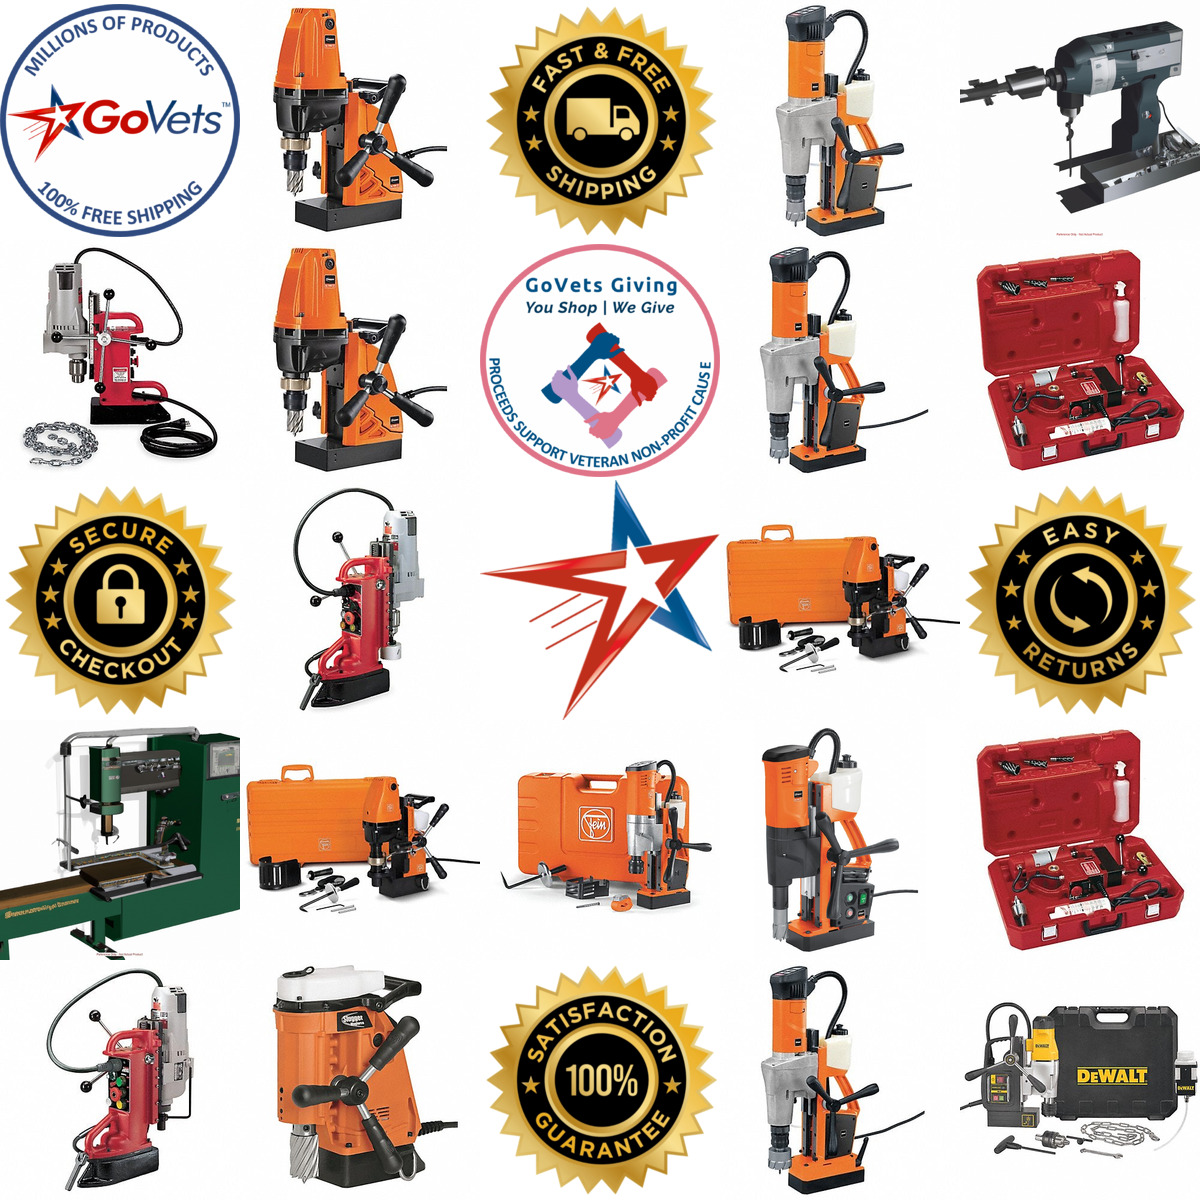 A selection of Corded Magnetic Drill Presses products on GoVets